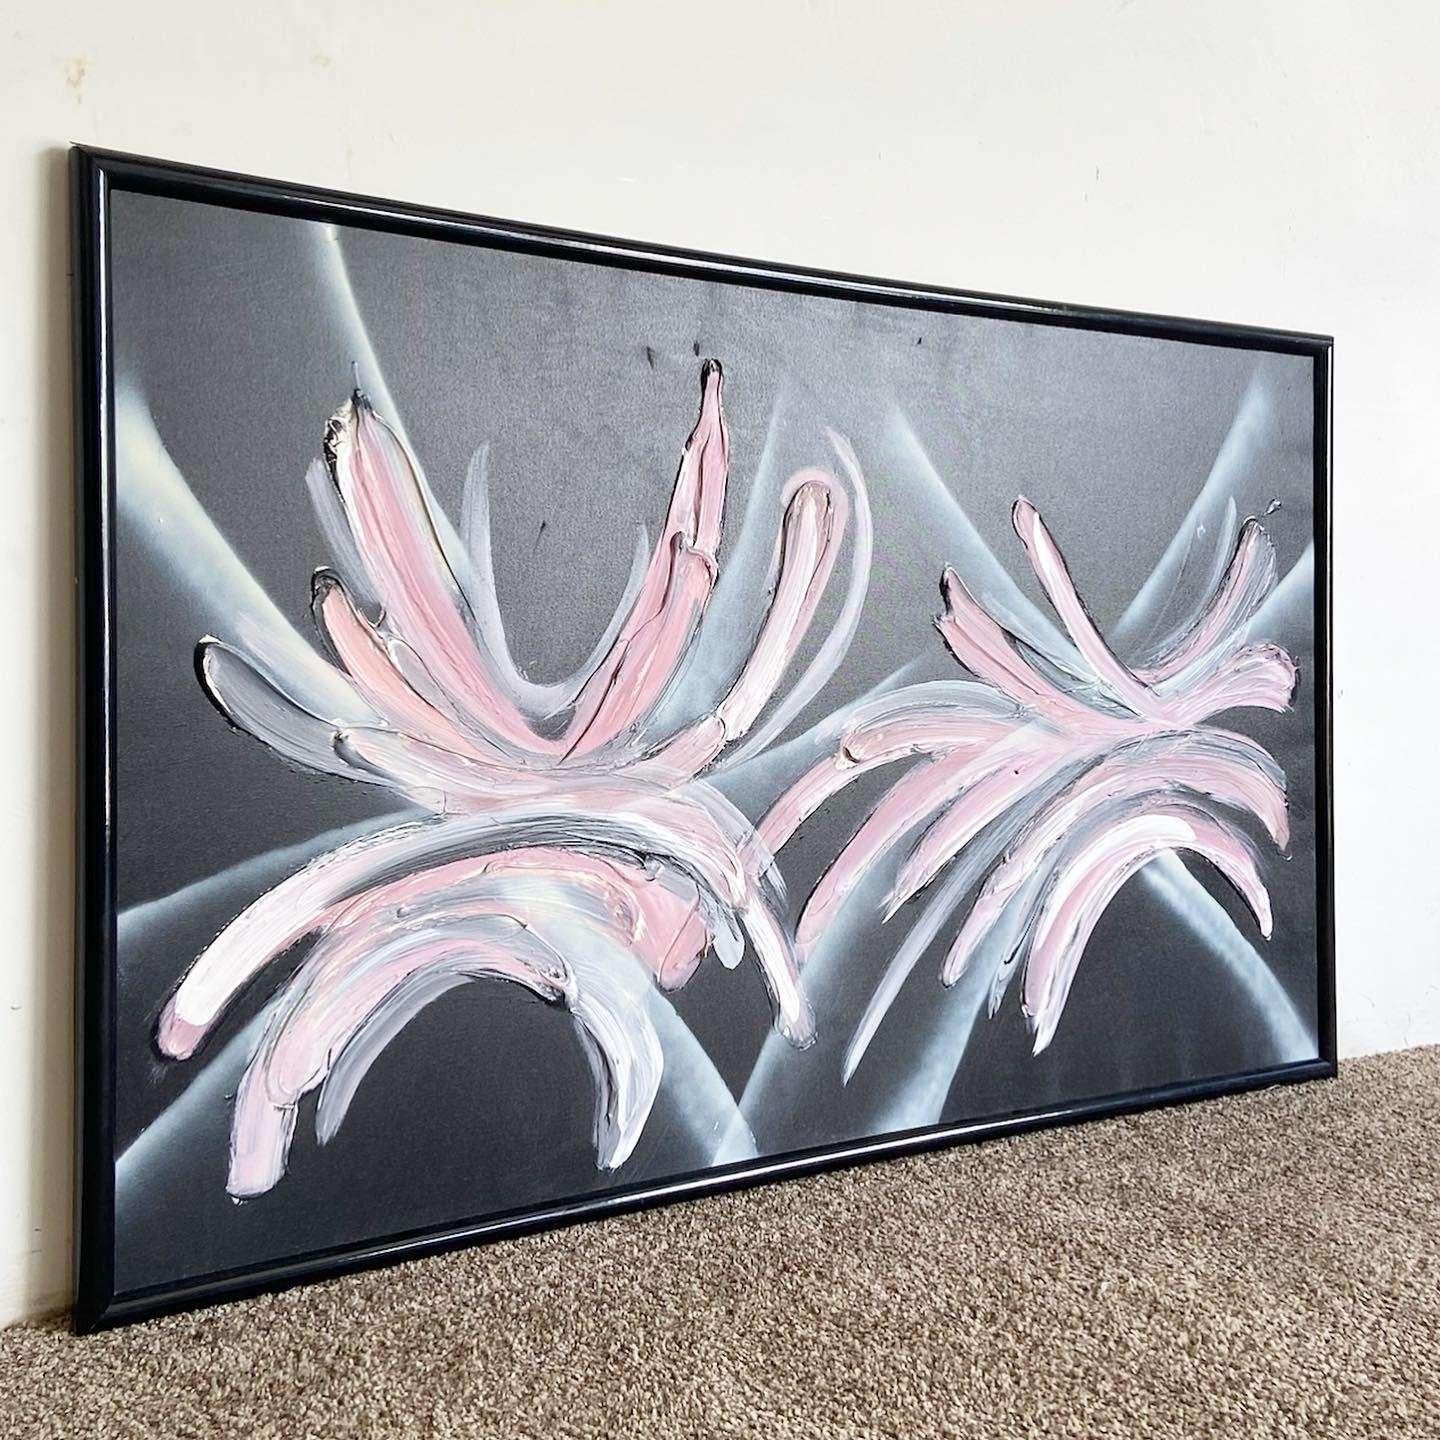 Amazing vintage postmodern abstract hand painted and framed oil painting. Features think pink and white textured strobes over a black backdrop in a black frame. 